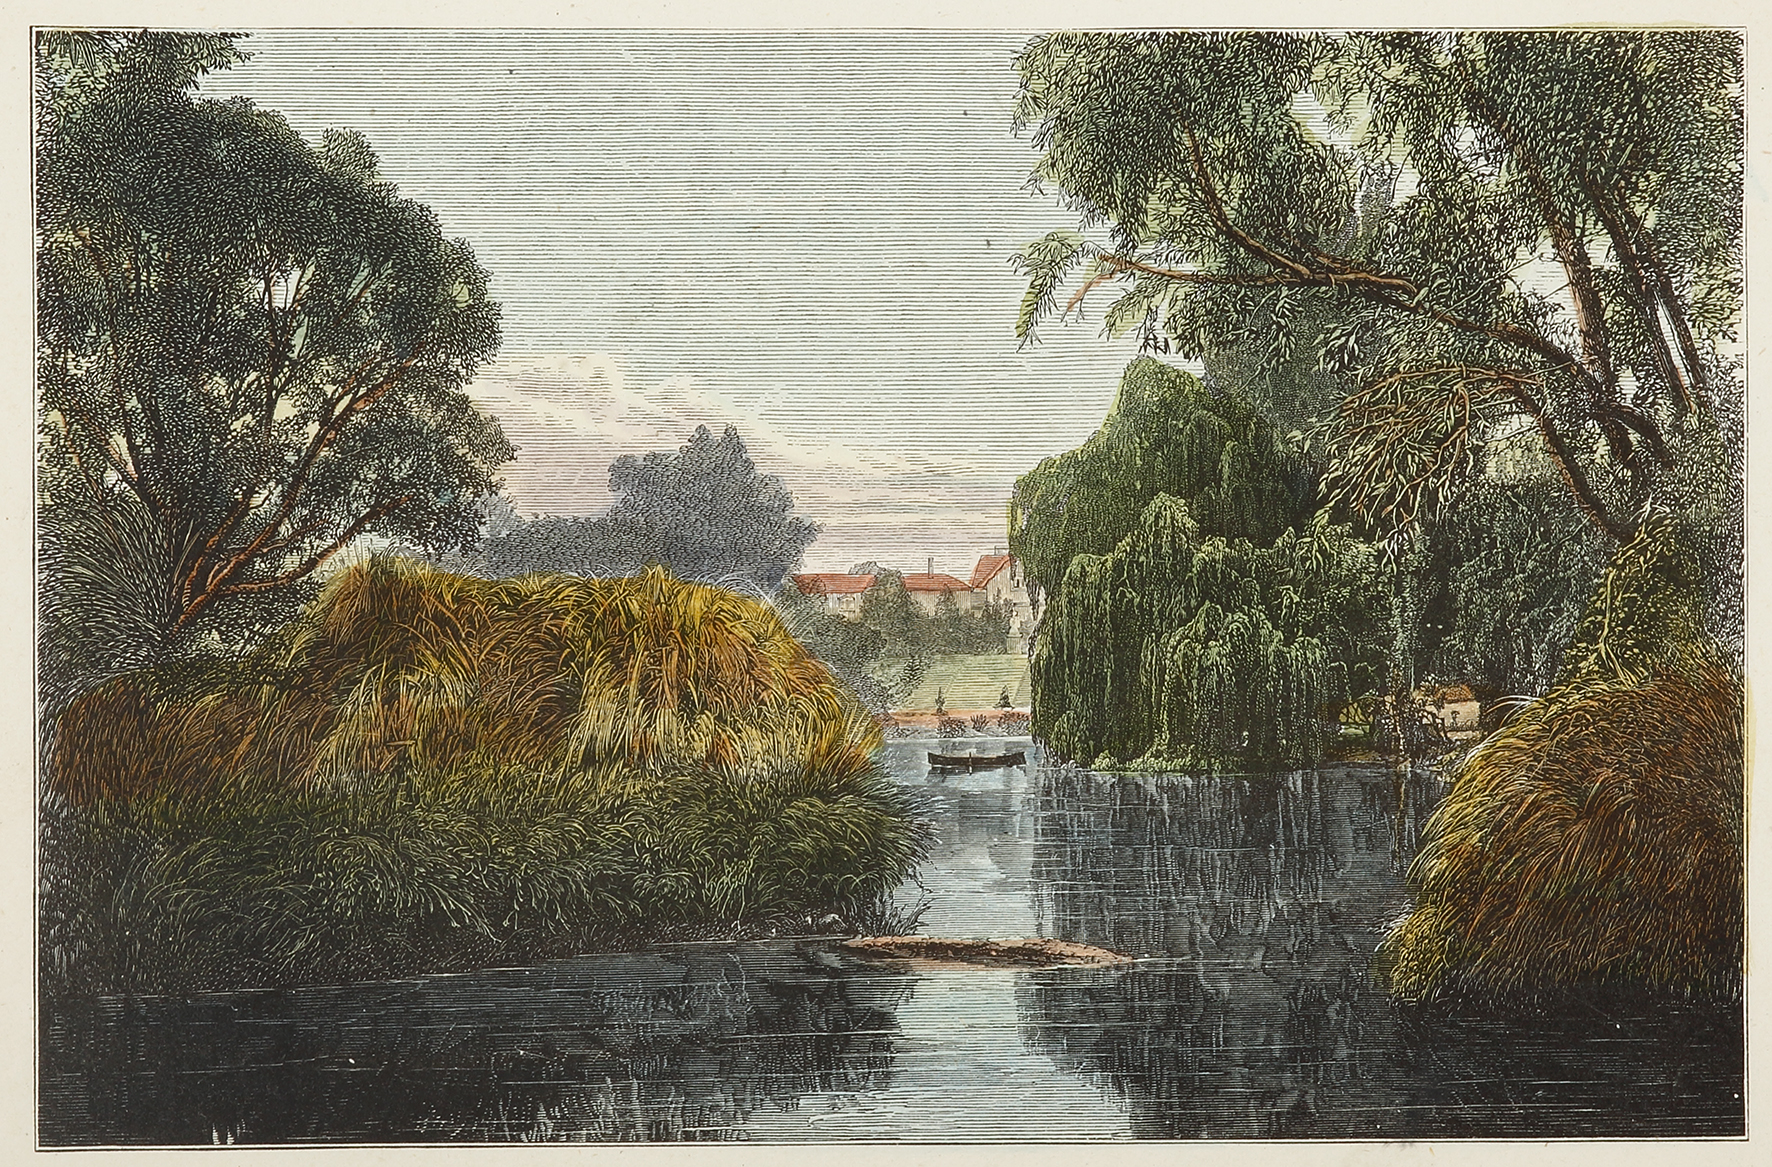 Botanical Gardens, Adelaide. (The Lake.) - Antique Print from 1876